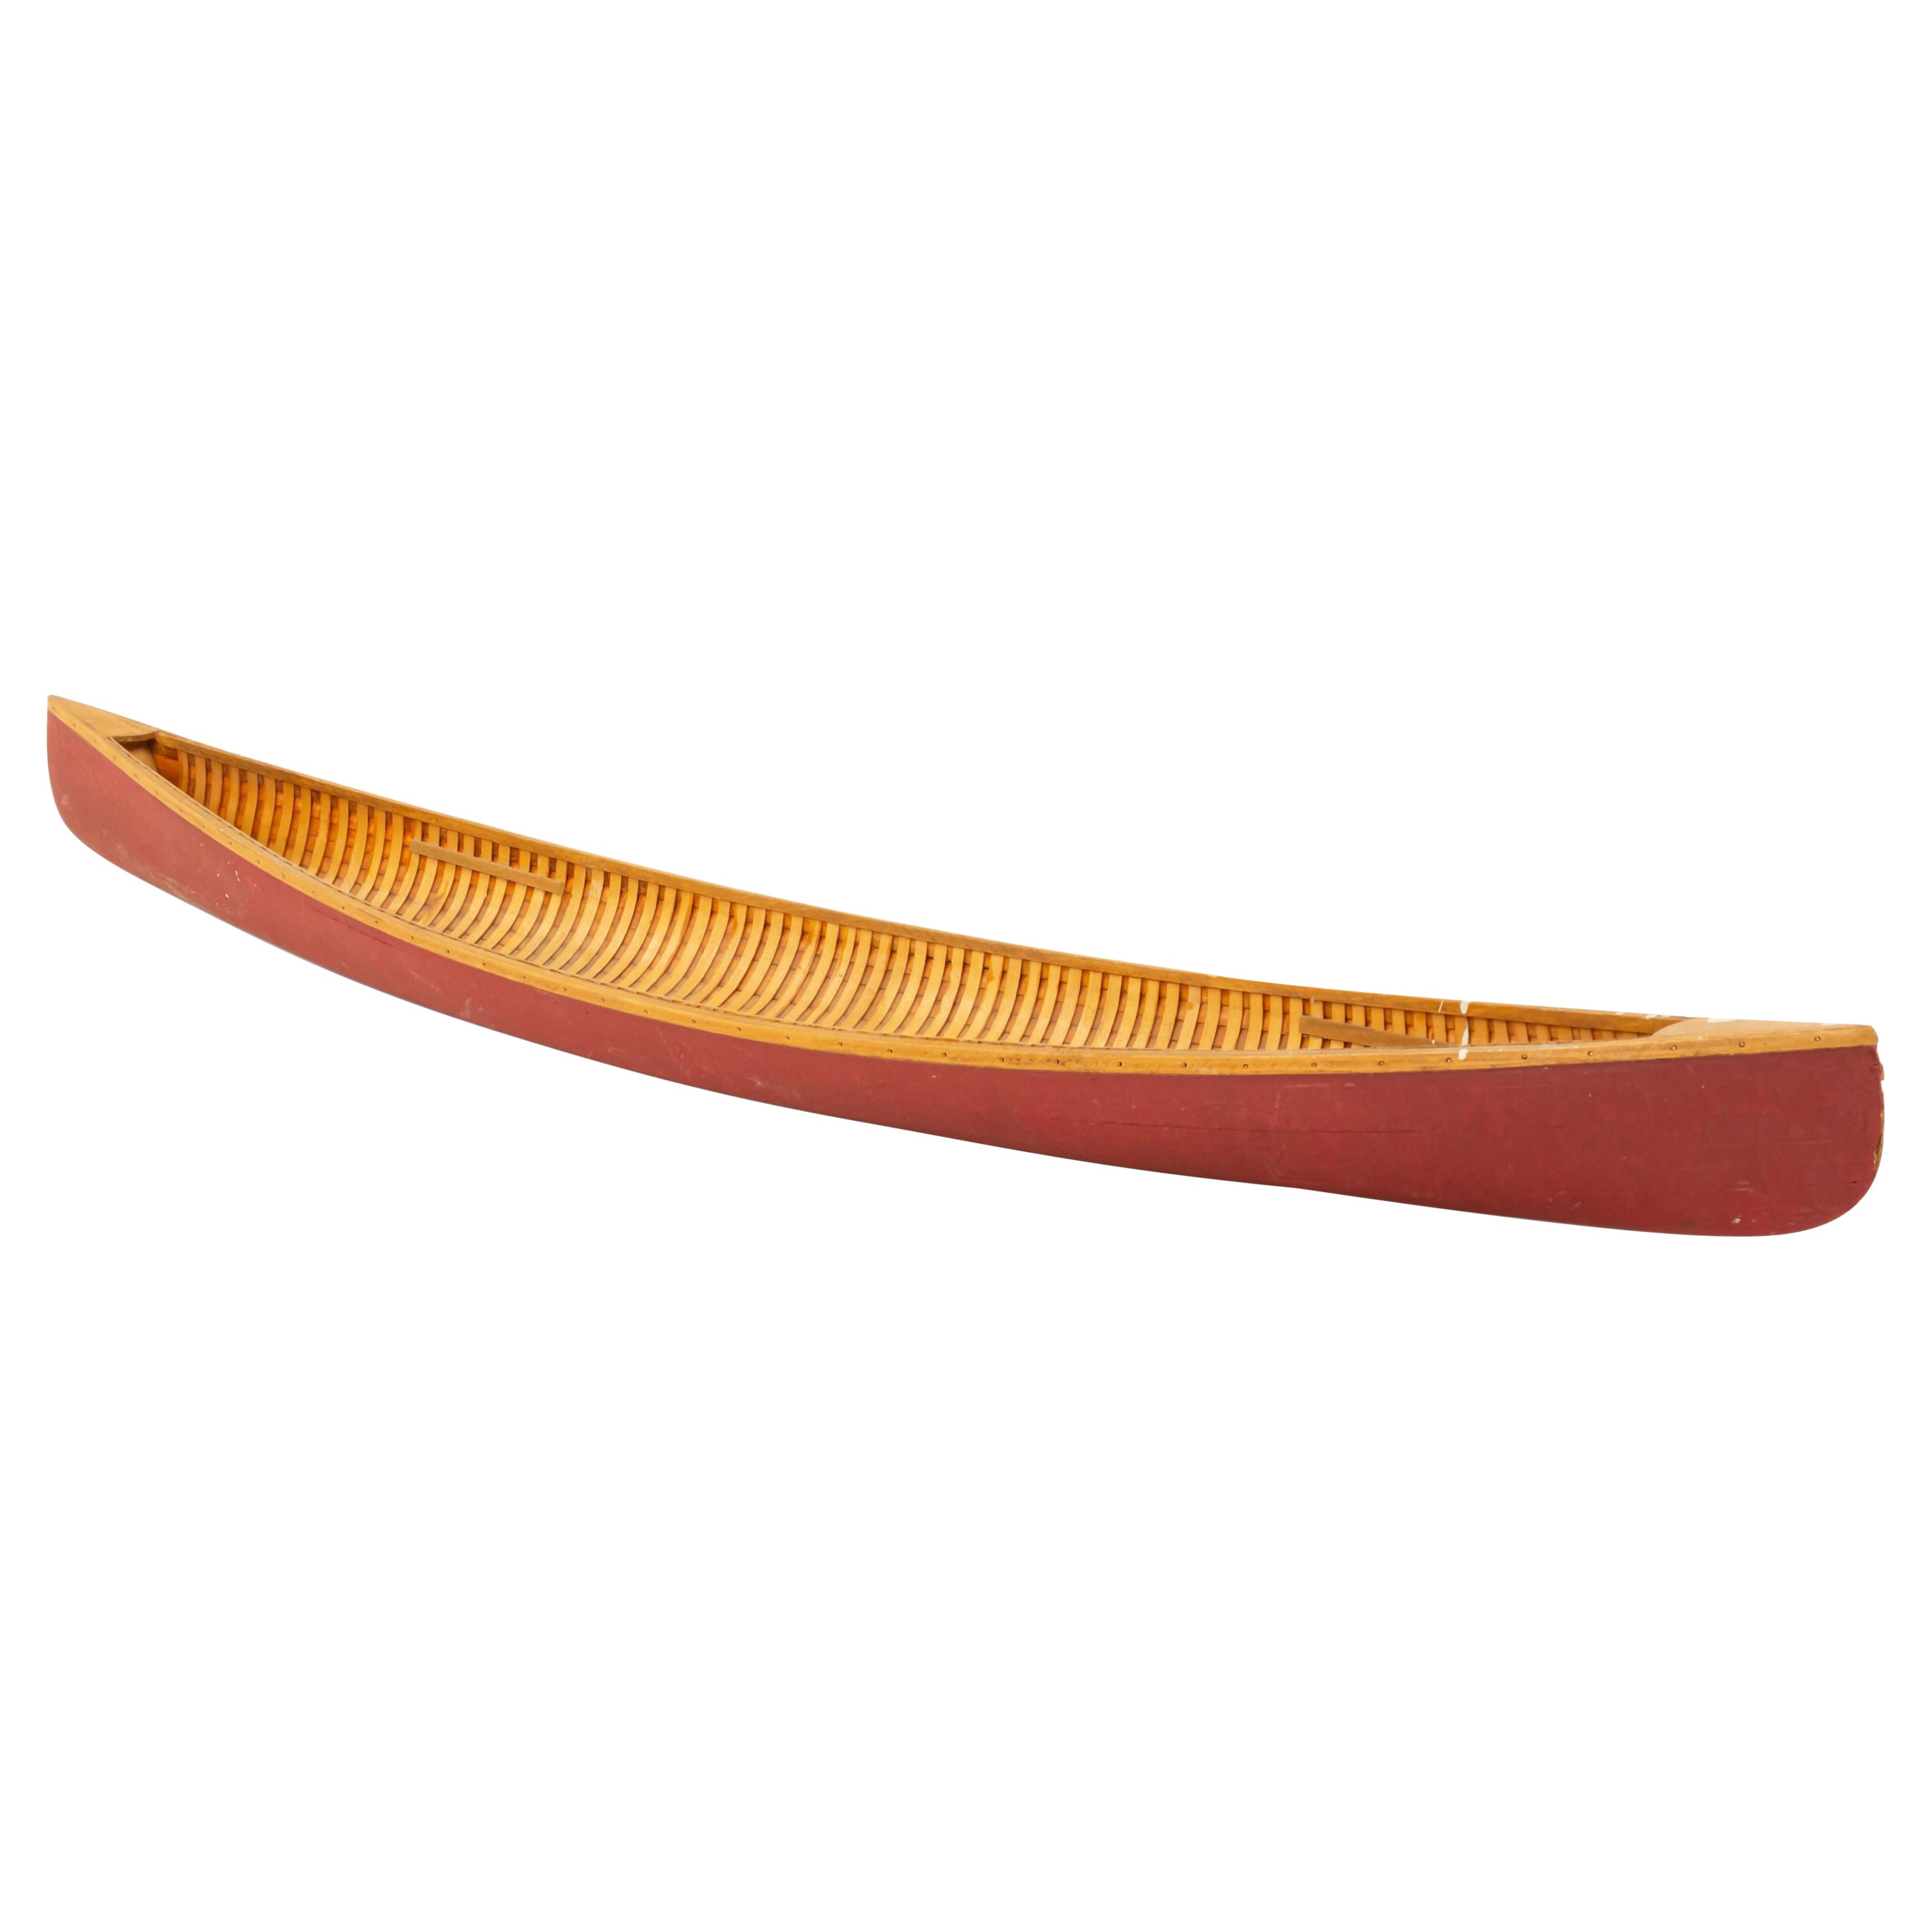 Rustic Painted Wooden Canoe Model